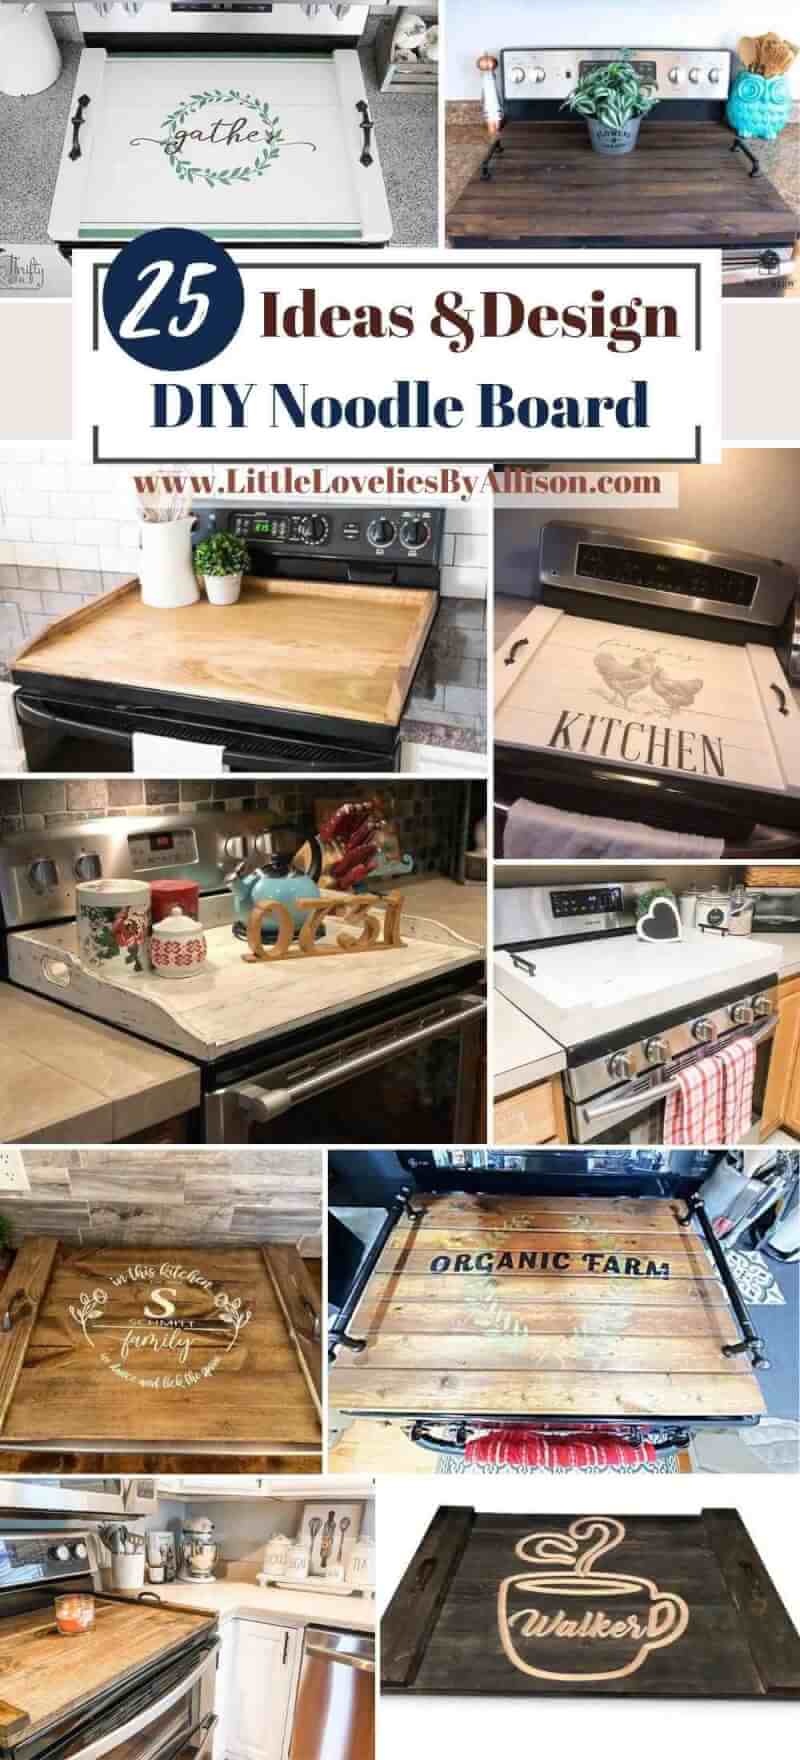 DIY Stovetop Boards (Noodle Boards) with SVG download - Pazzles Craft room